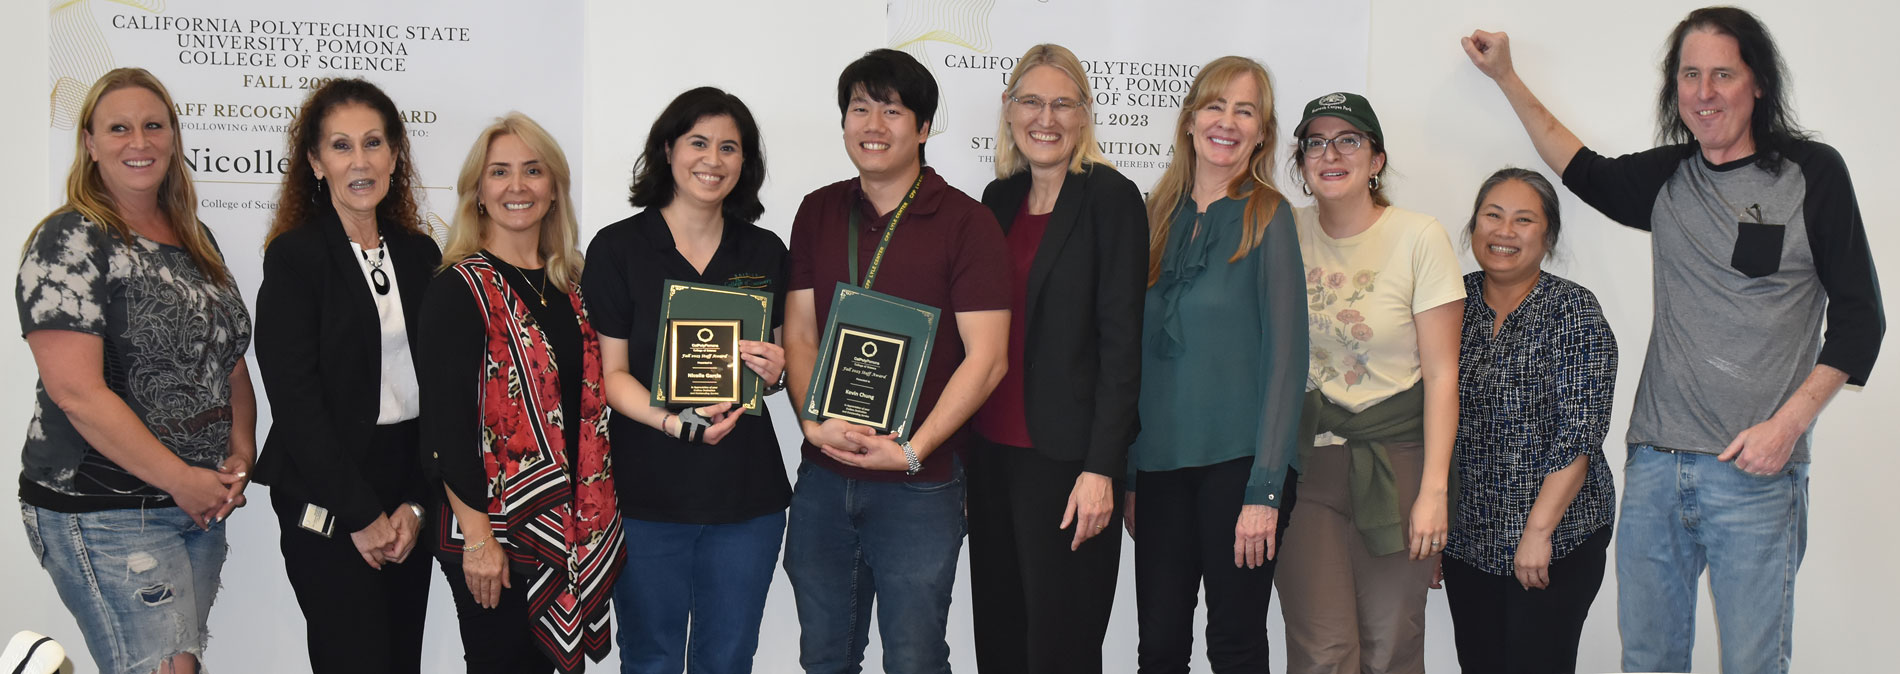 Fall 2023 staff award winners Nicolle Garcia and Kevin Chung pose with staff.